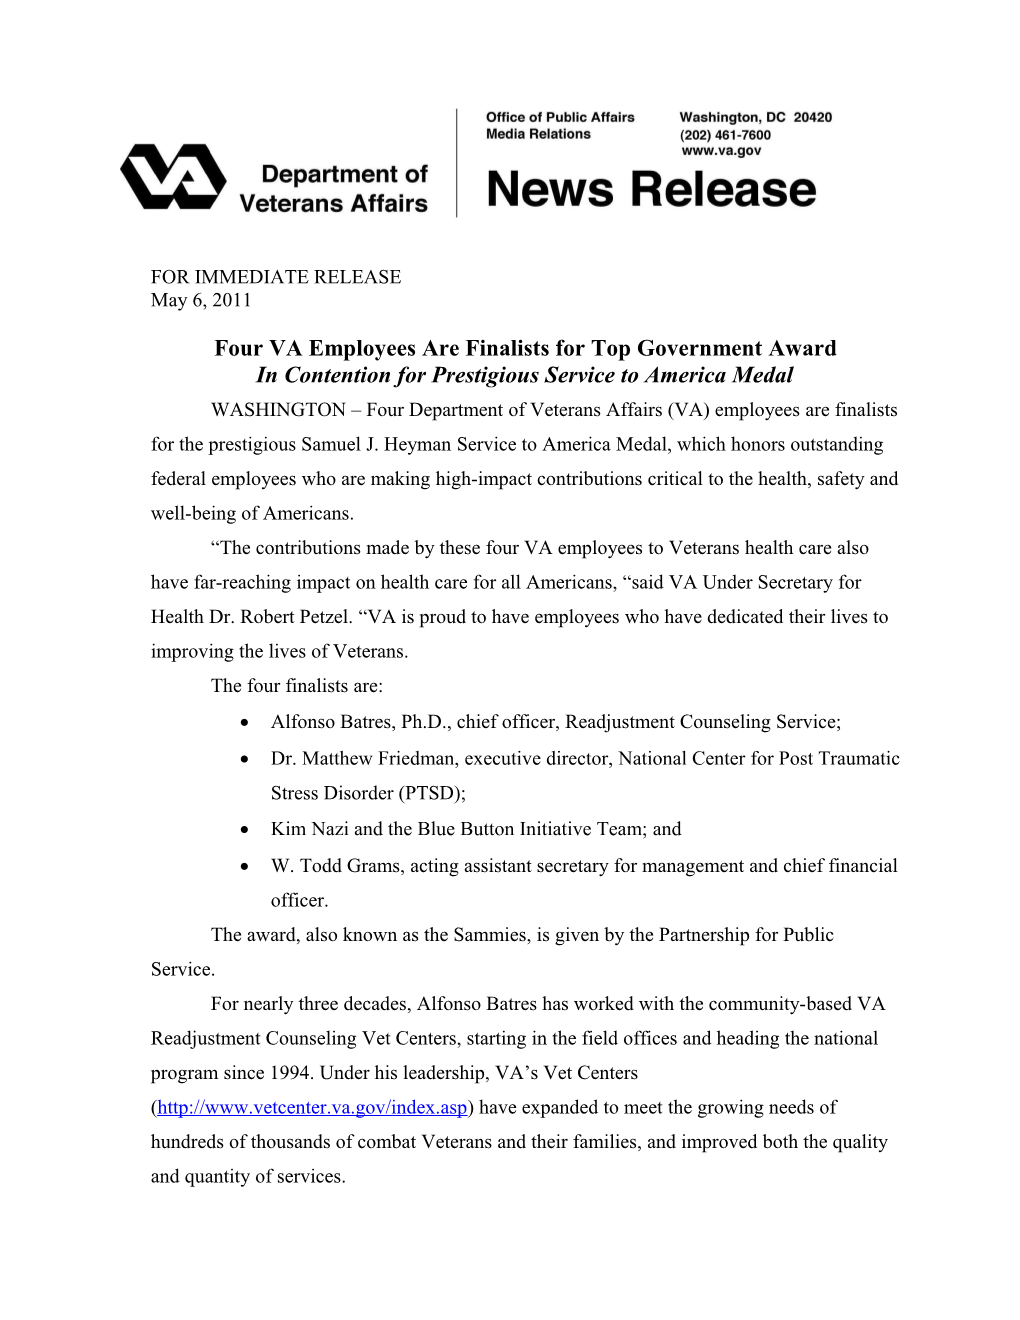 Four VA Employees Are Finalists for Top Government Award